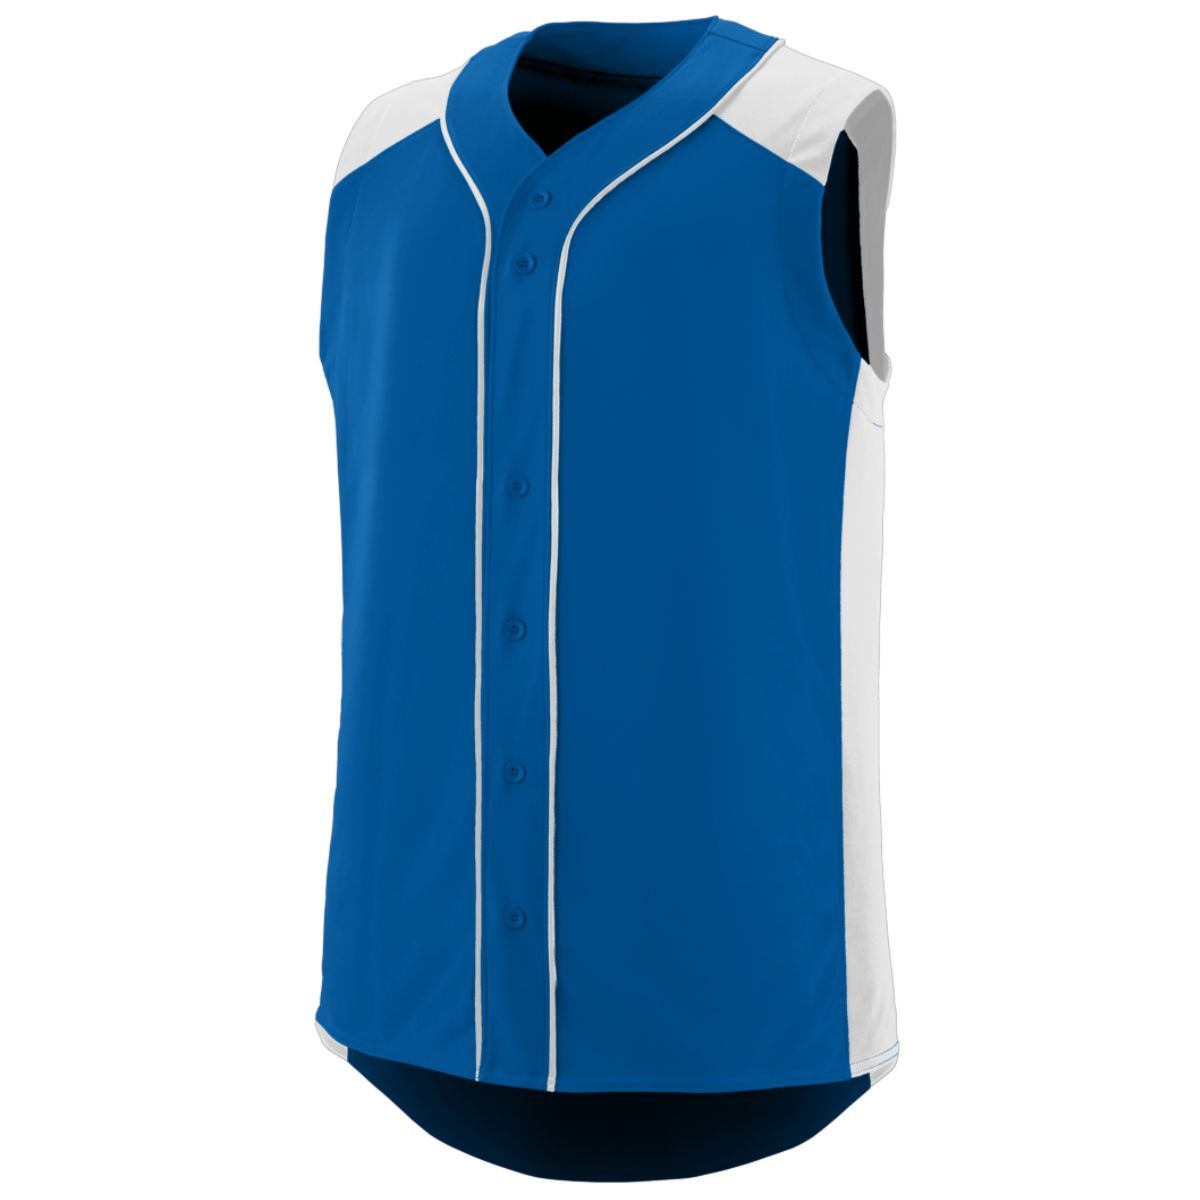 Augusta Sportswear Youth Sleeveless Slugger Jersey in Royal/White  -Part of the Youth, Youth-Jersey, Augusta-Products, Baseball, Shirts, All-Sports, All-Sports-1 product lines at KanaleyCreations.com